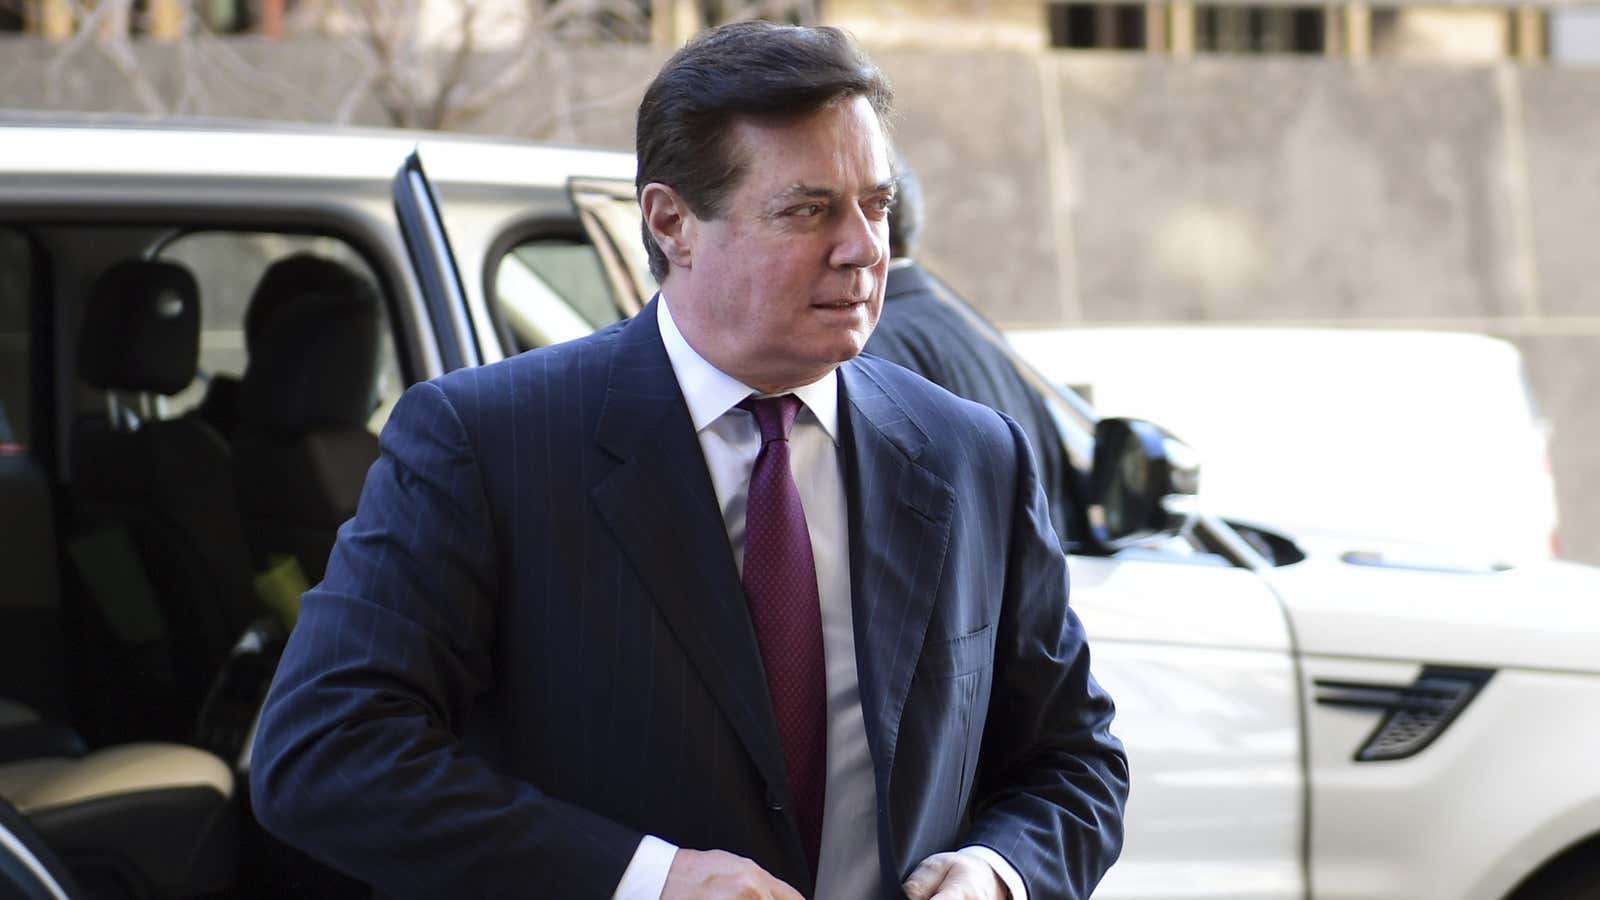 Manafort is currently in jail, awaiting sentencing.